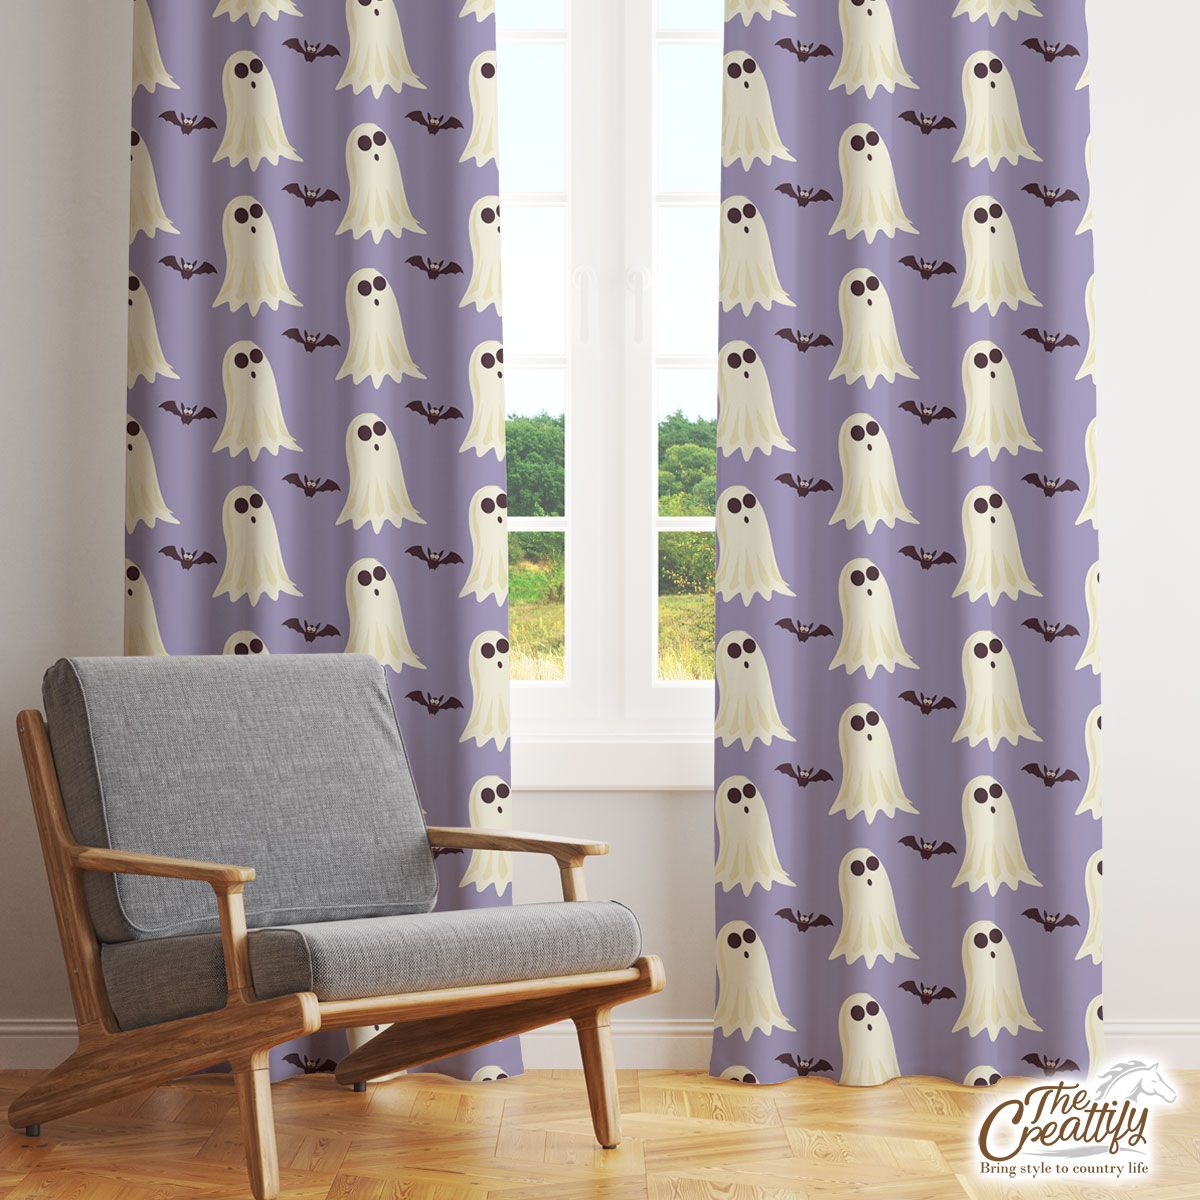 Cute and Funny White Boo Ghost And Bat Halloween Window Curtain